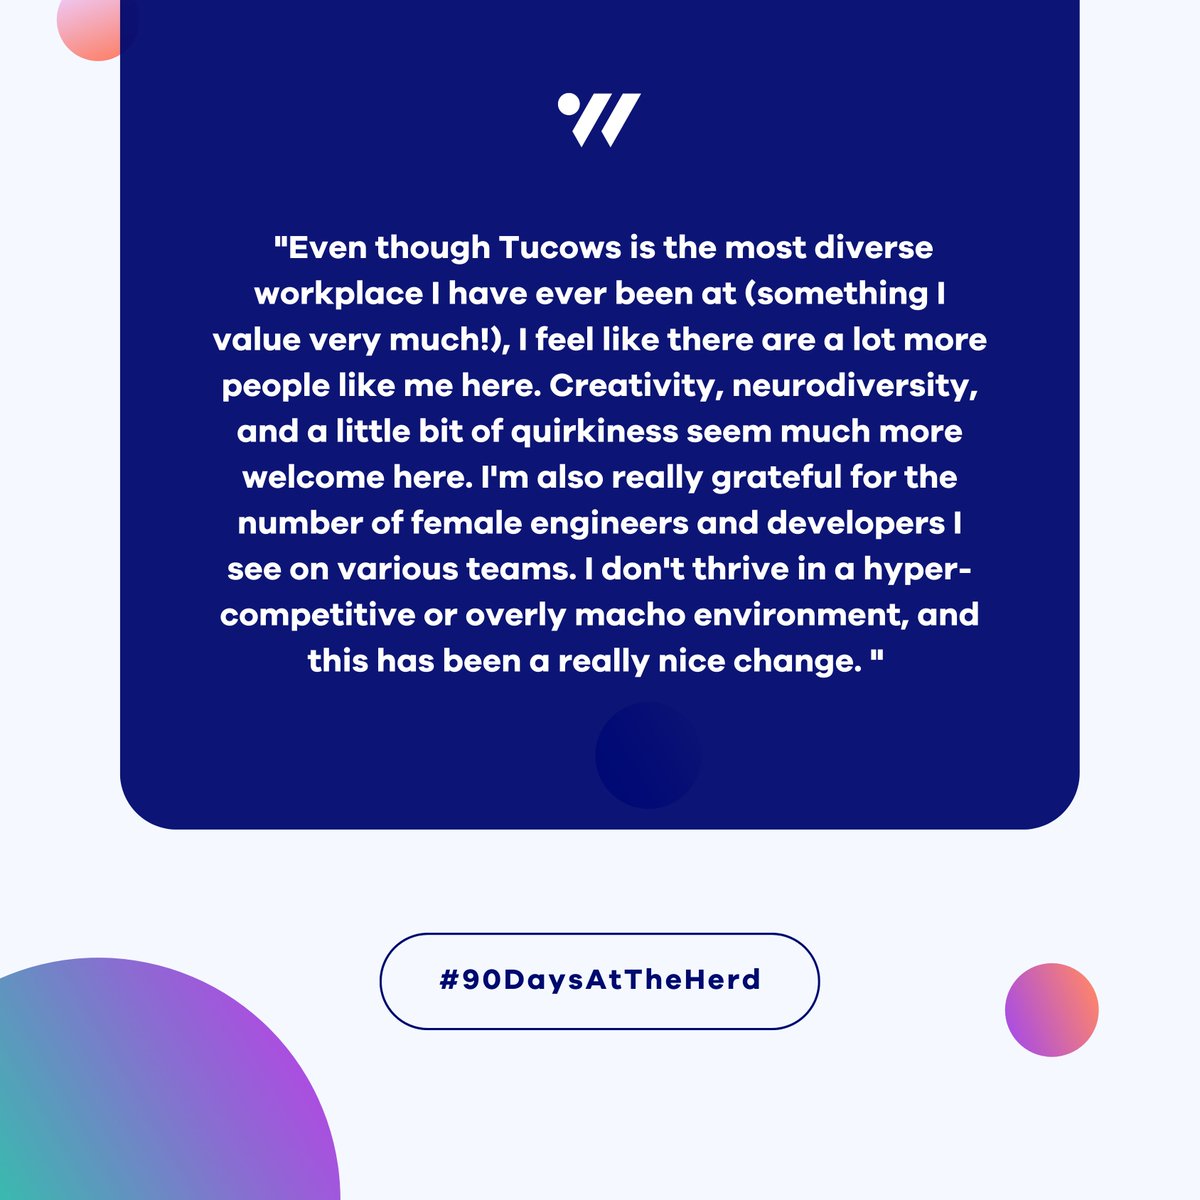 We're excited to hear how our newest herd members feel about their first #90DaysAtTheHerd! 
 
We believe diversity of thought, lived experiences, and backgrounds are the keys to building incredible teams that are #MakingThelnternetBetter.  

#EmployeeTestimonial #EmployeeReview